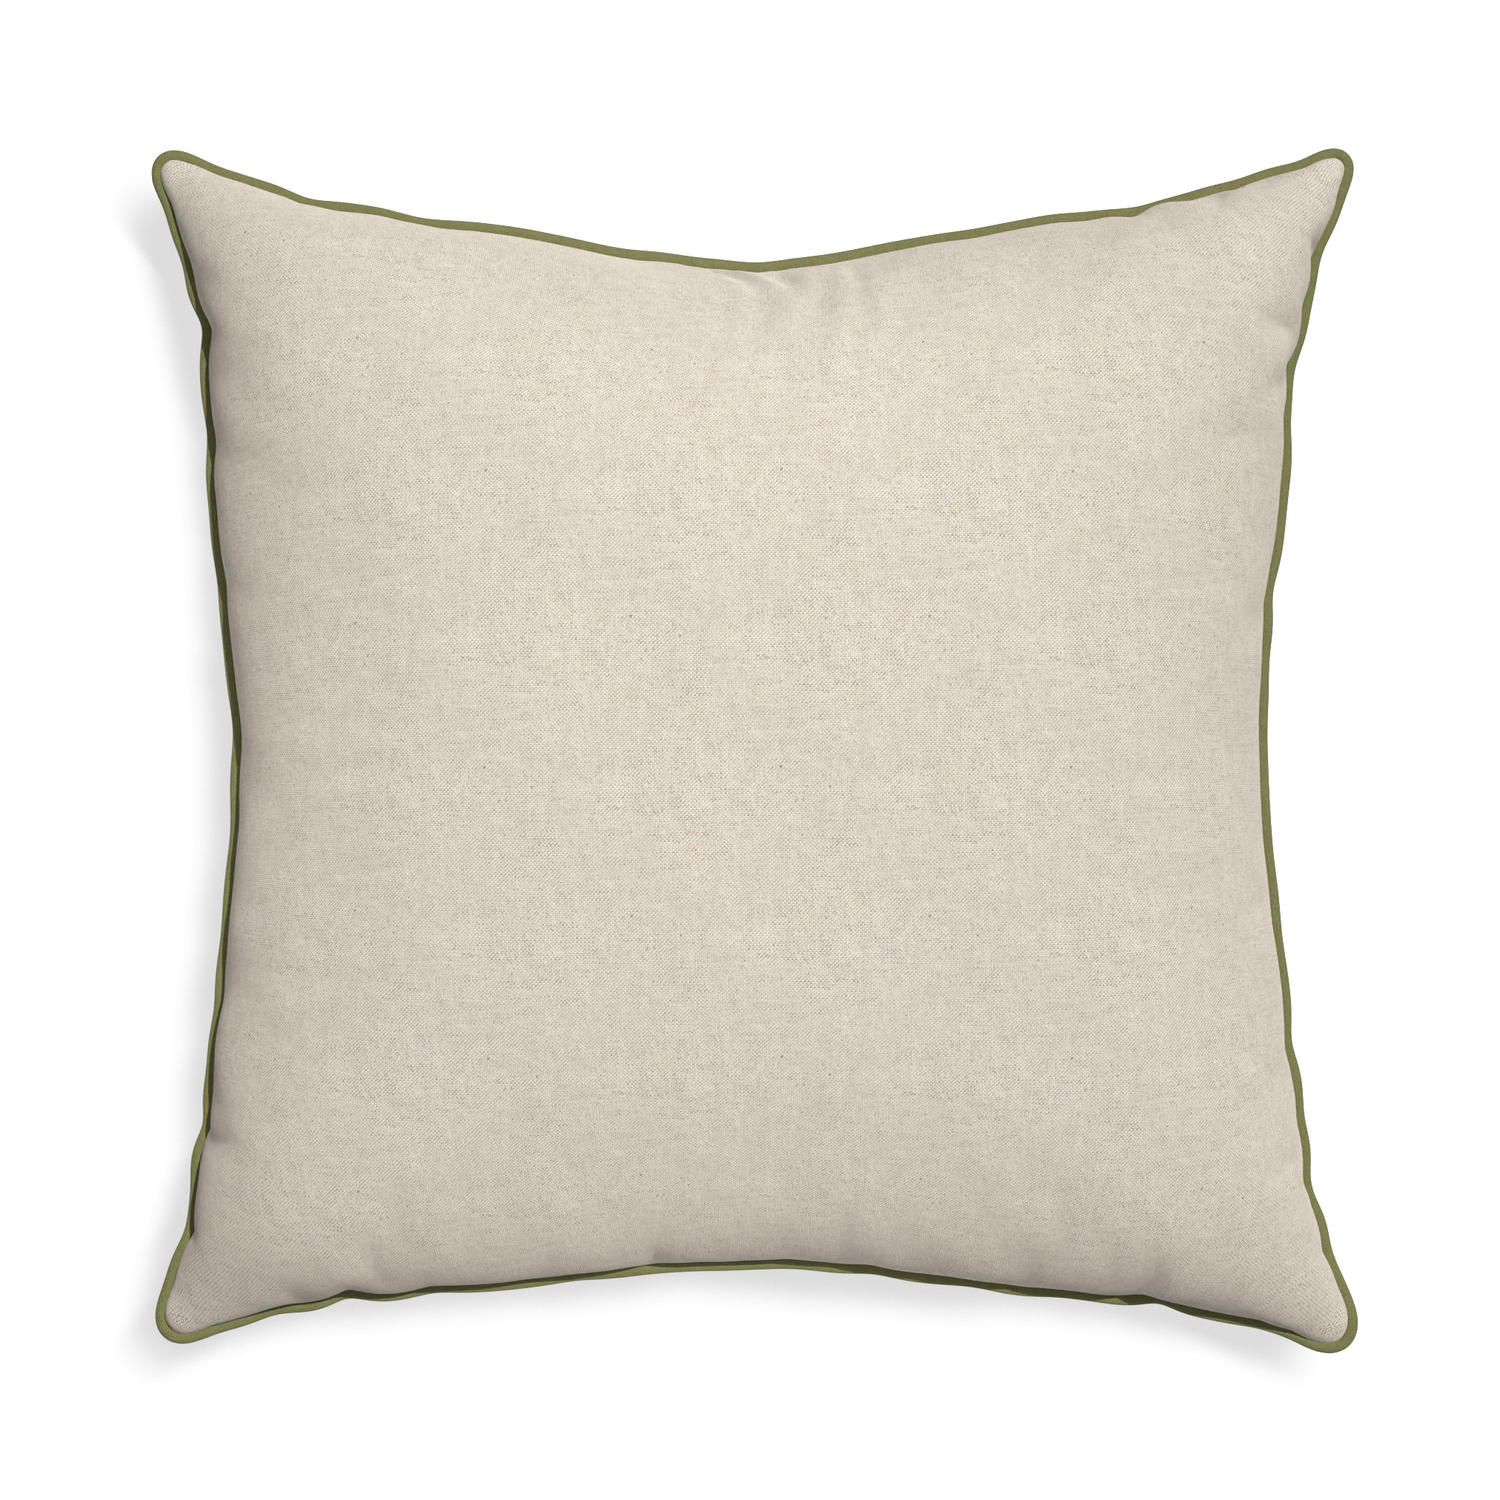 Euro-sham oat custom pillow with moss piping on white background